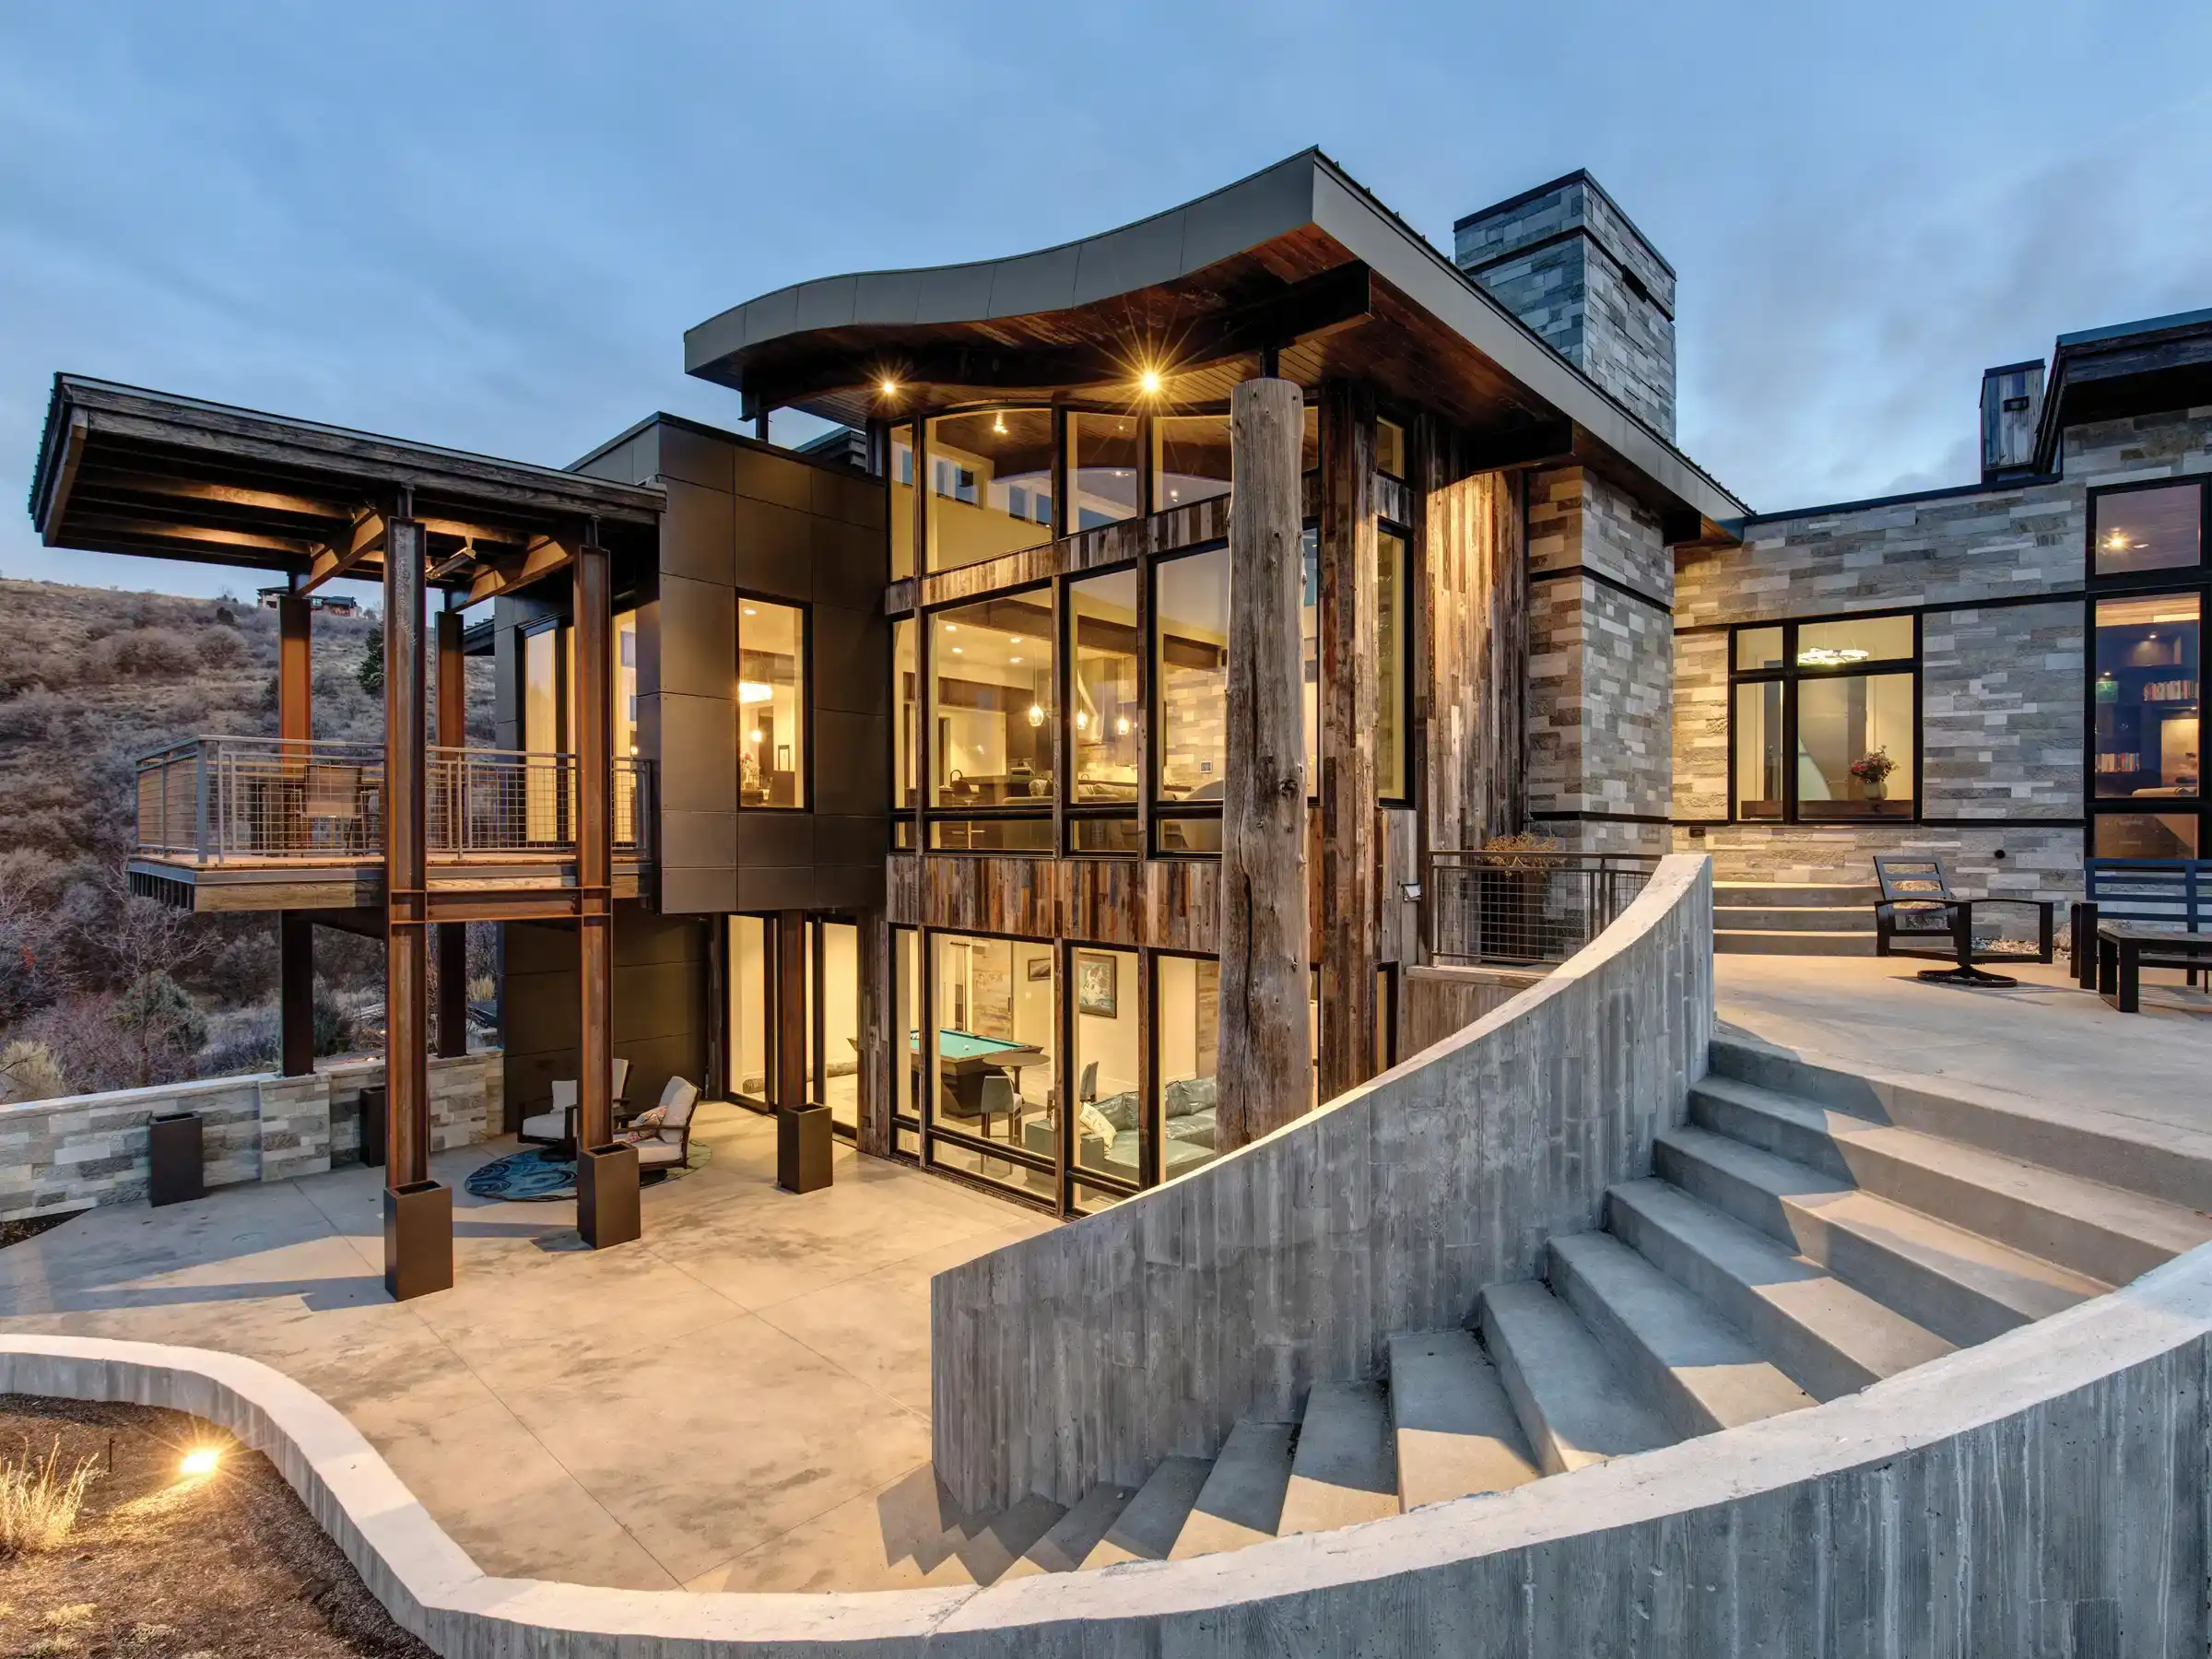 A custom home featuring superb craftsmanship built by Big Canyon Homes.